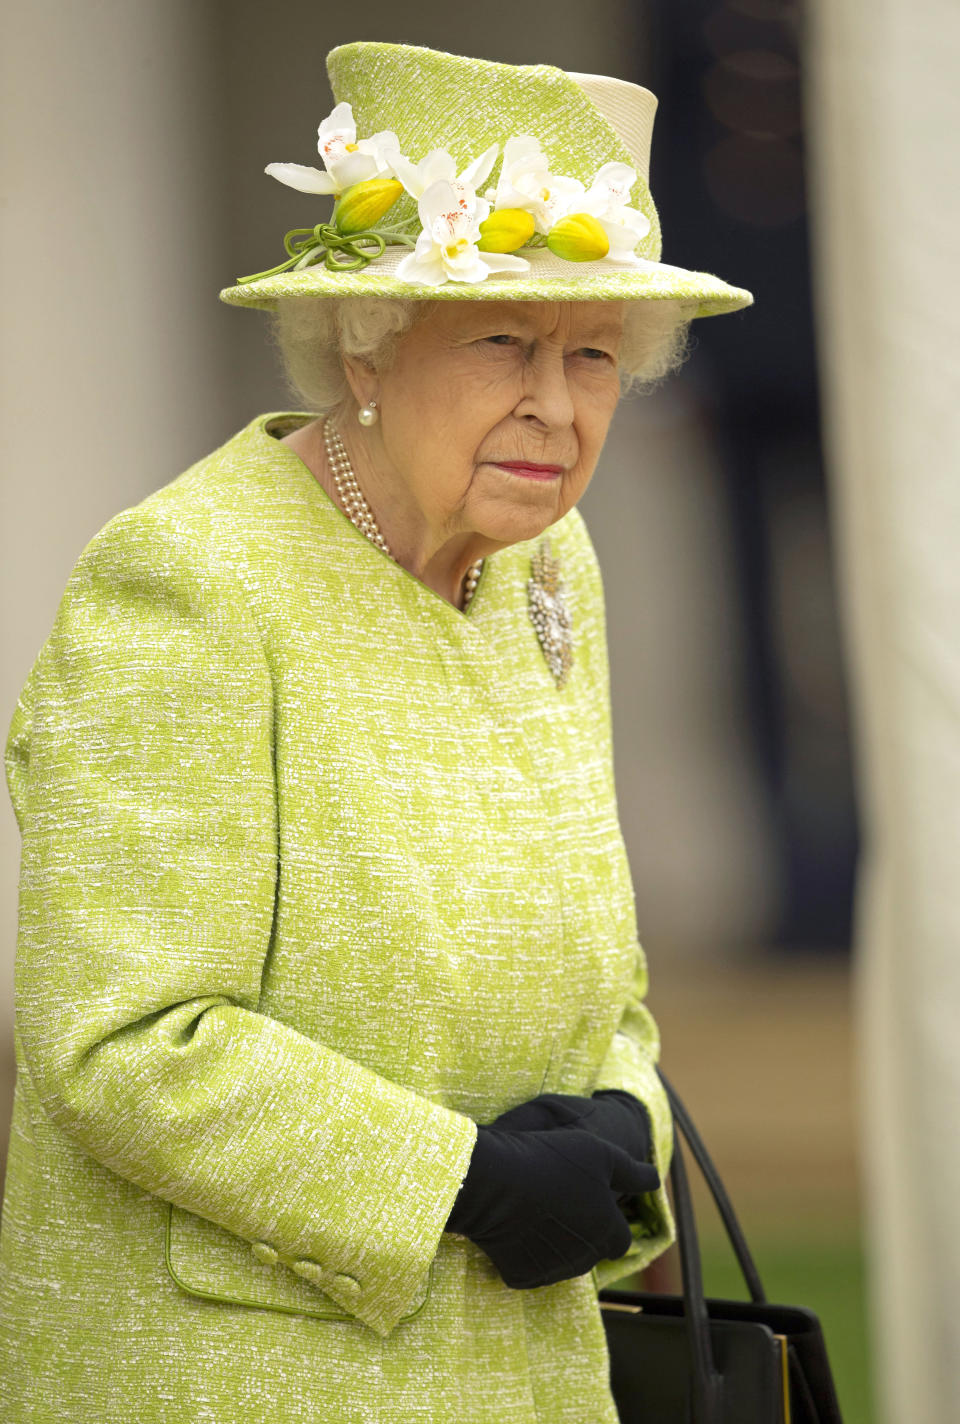 Queen Elizabeth II during a visit to the CWGC Air Forces Memorial in Runnymede, Surrey, to attend a service to mark the Centenary of the Royal Australian Air Force. Picture date: Wednesday March 31, 2021.